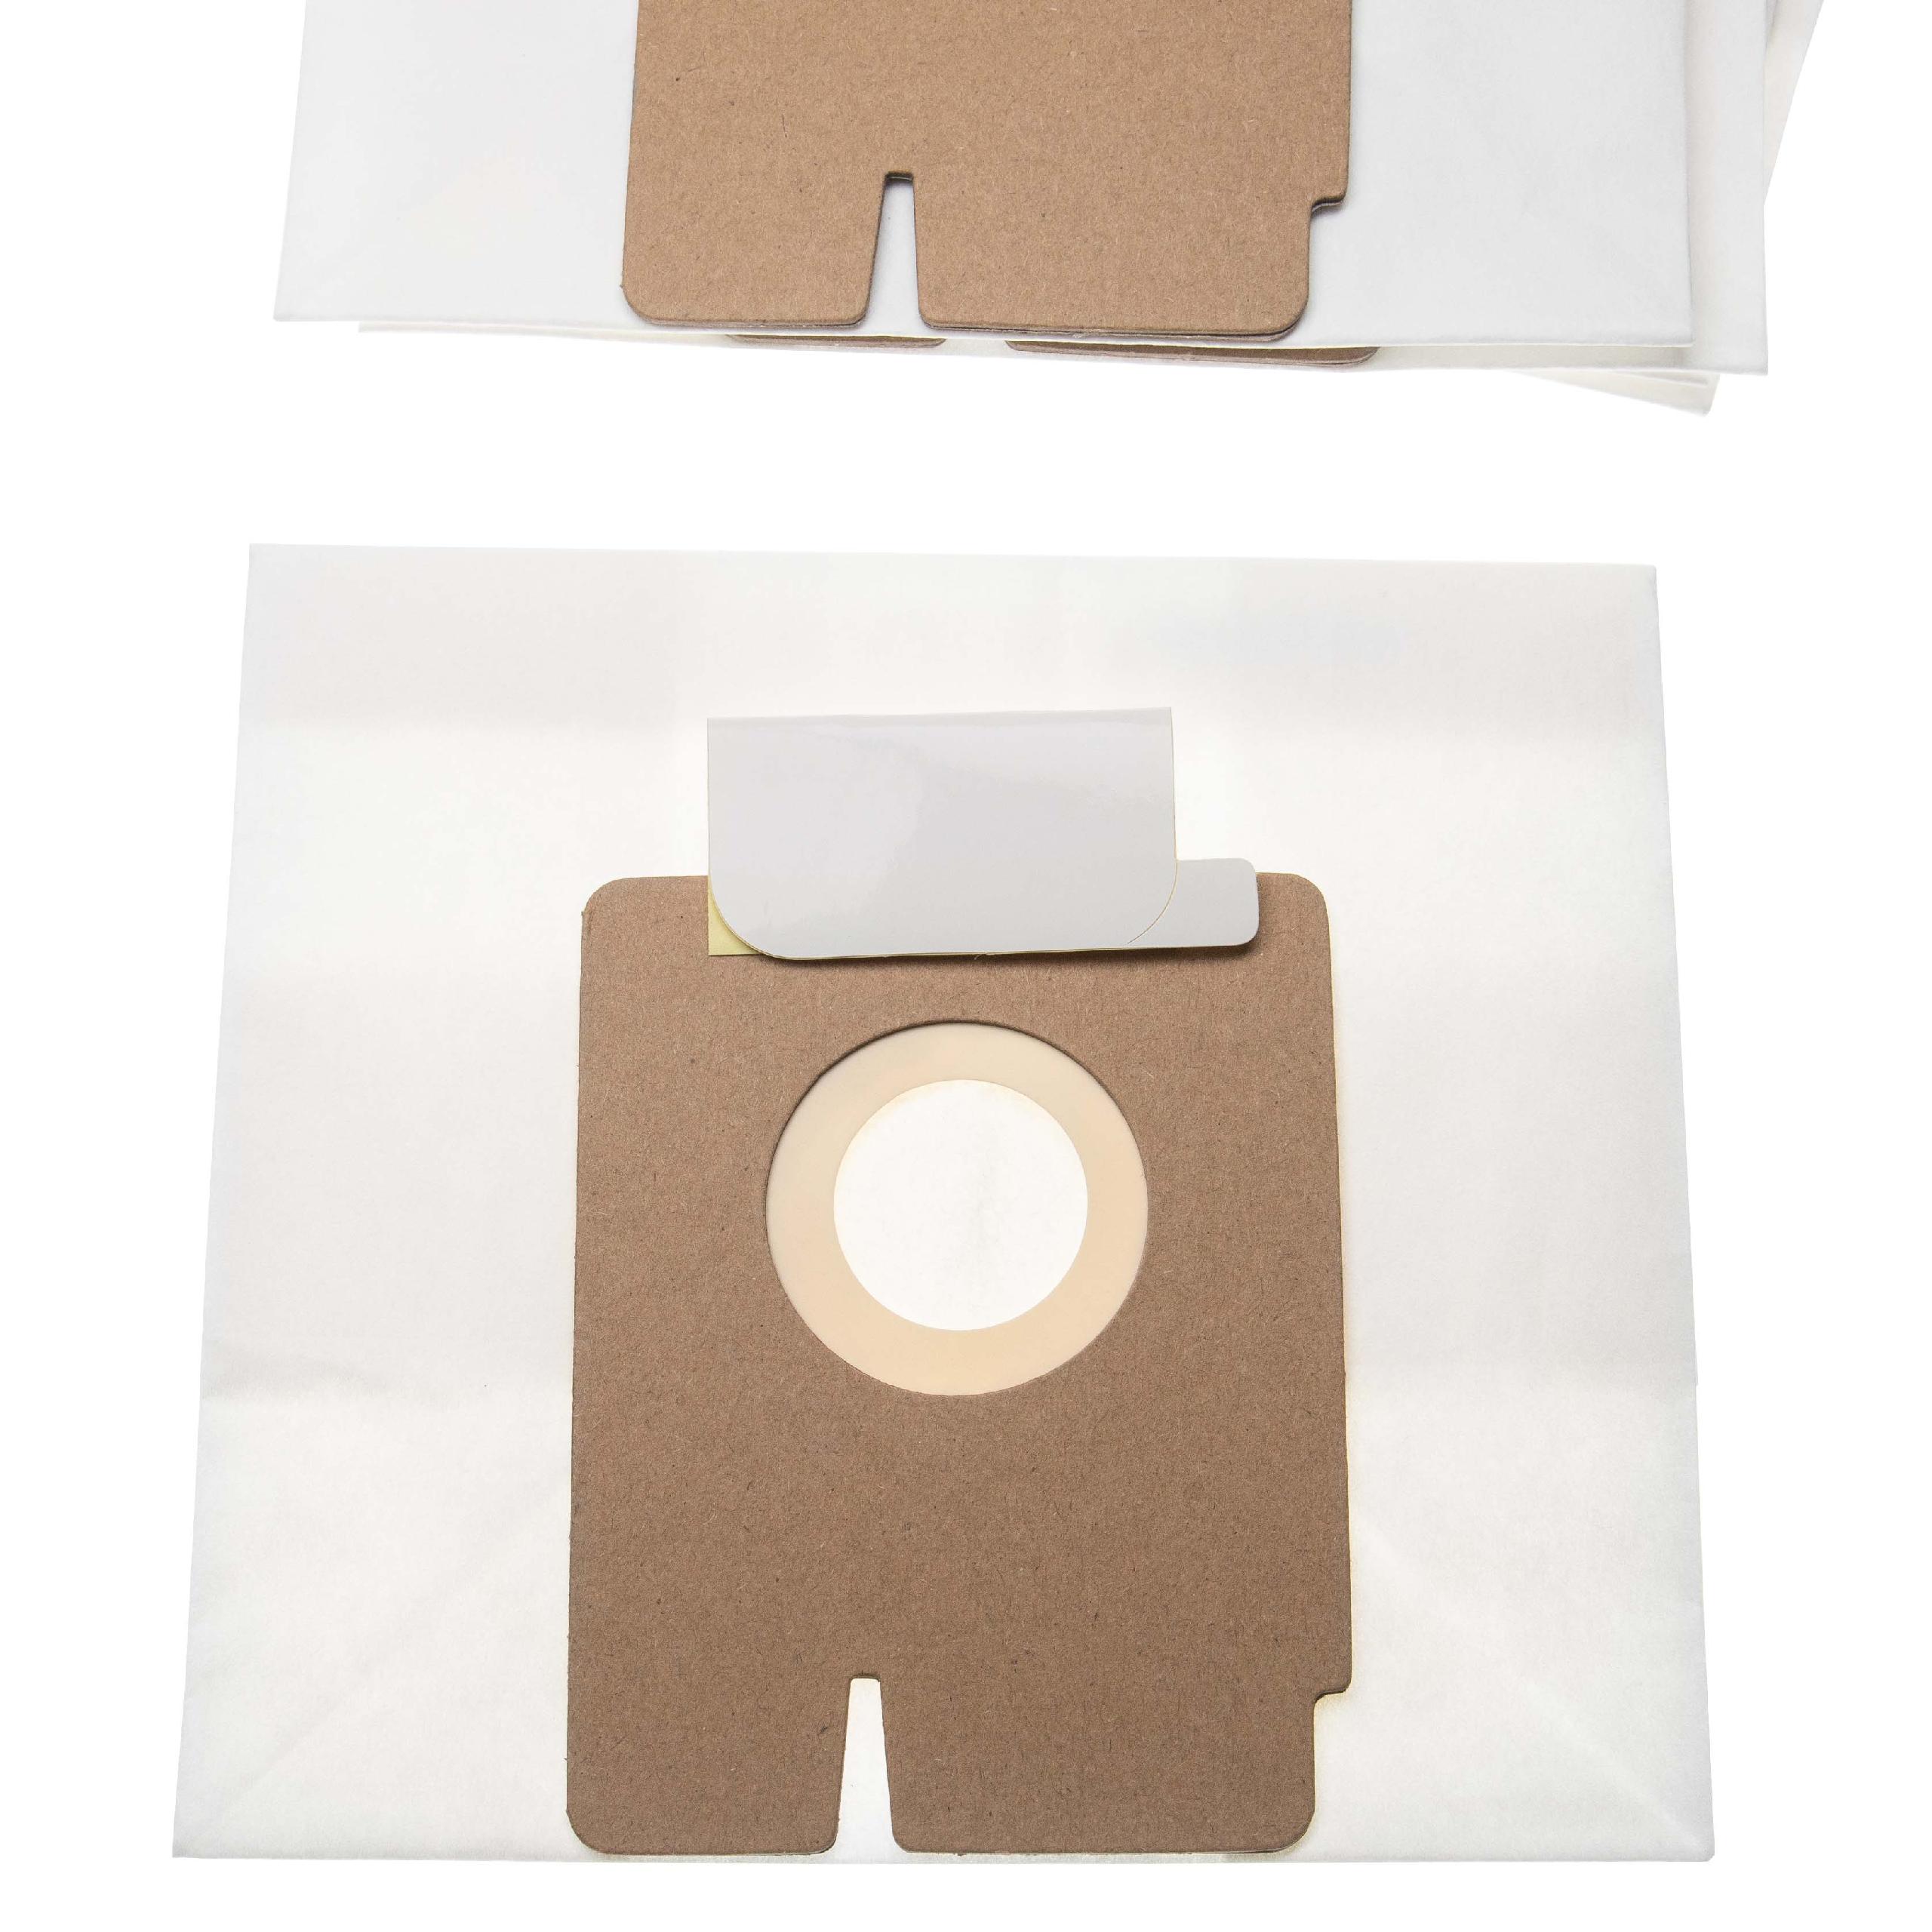 5x Vacuum Cleaner Bag replaces Hoover H69, 35601053 for Candy - paper